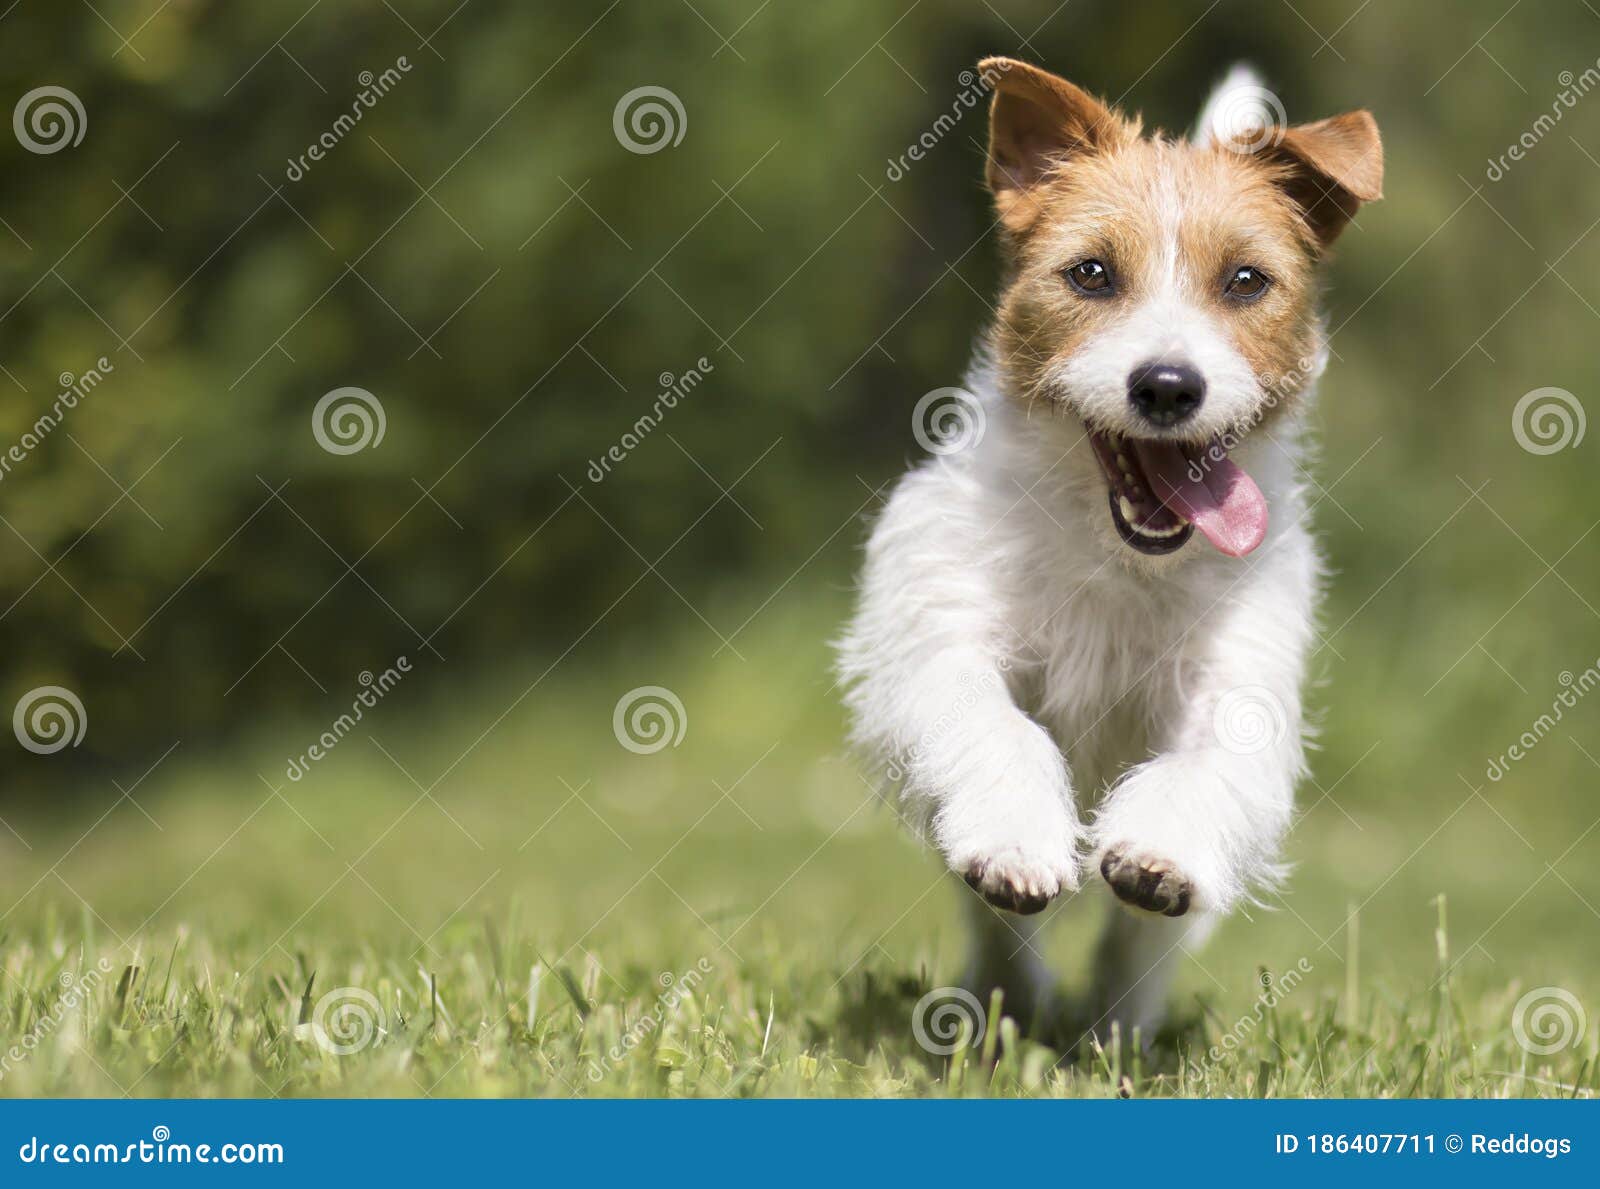 funny playful happy smiling pet dog puppy running, jumping in the grass